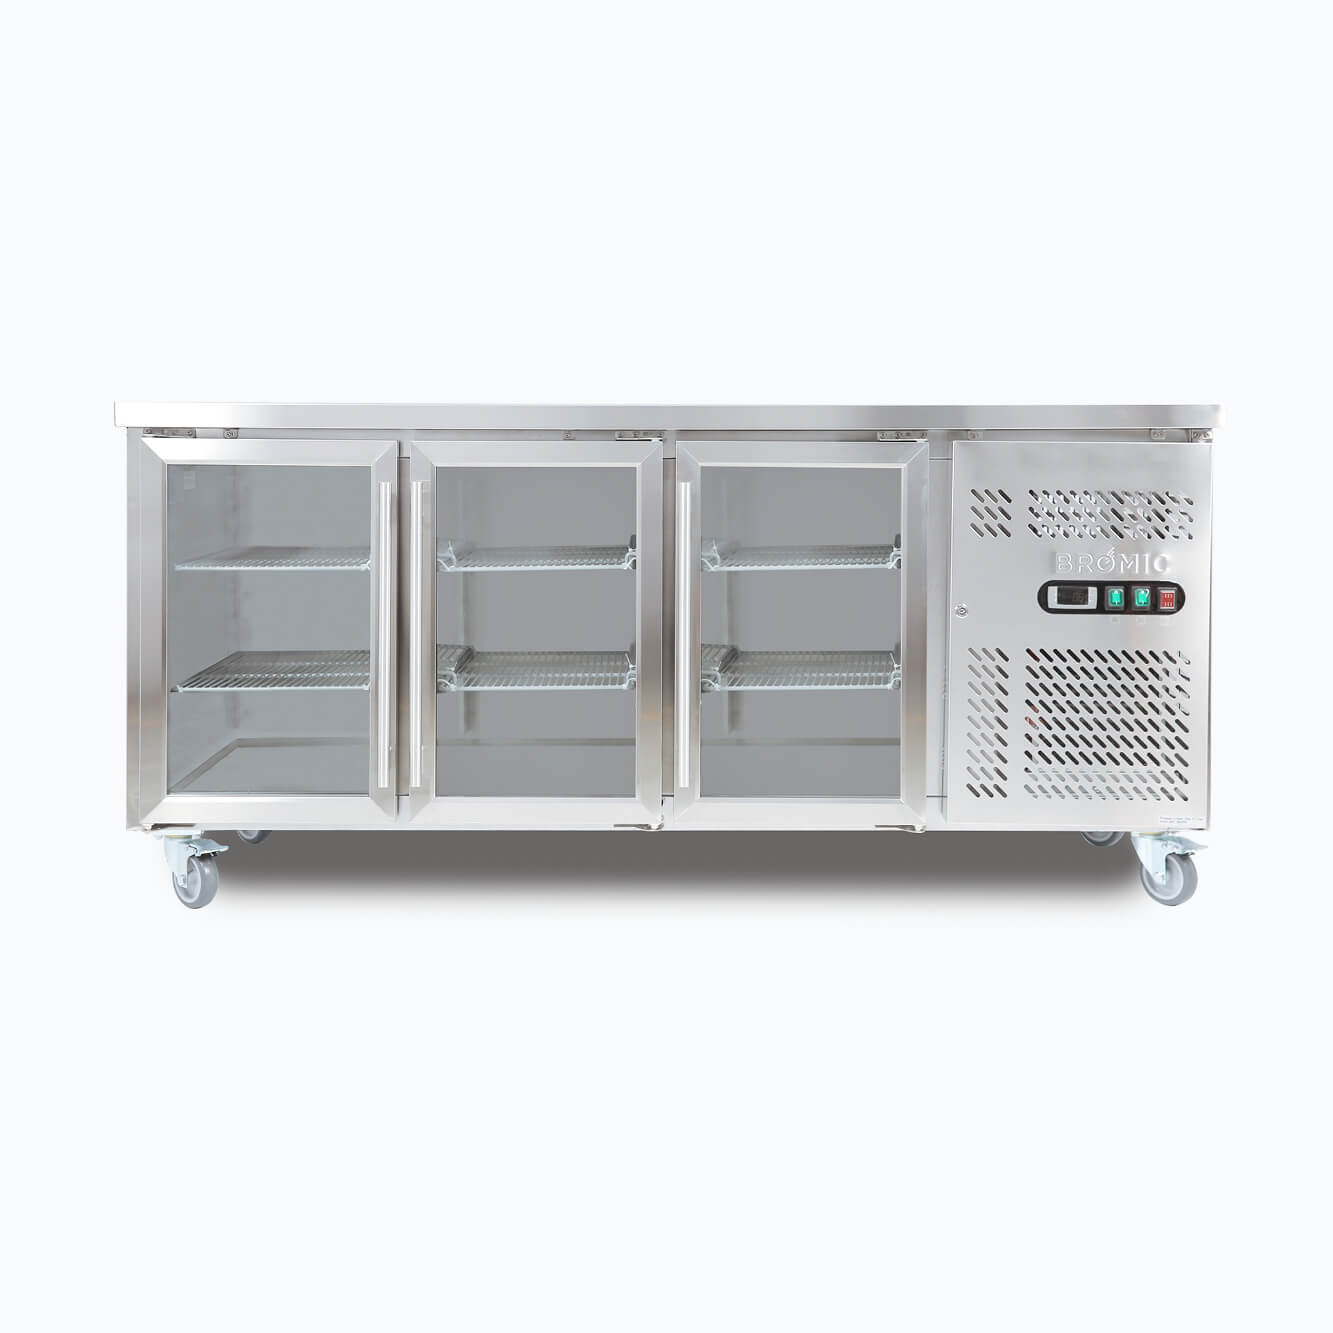 Image of a 417L stainless steel under bench display fridge with three hinged doors, front view.